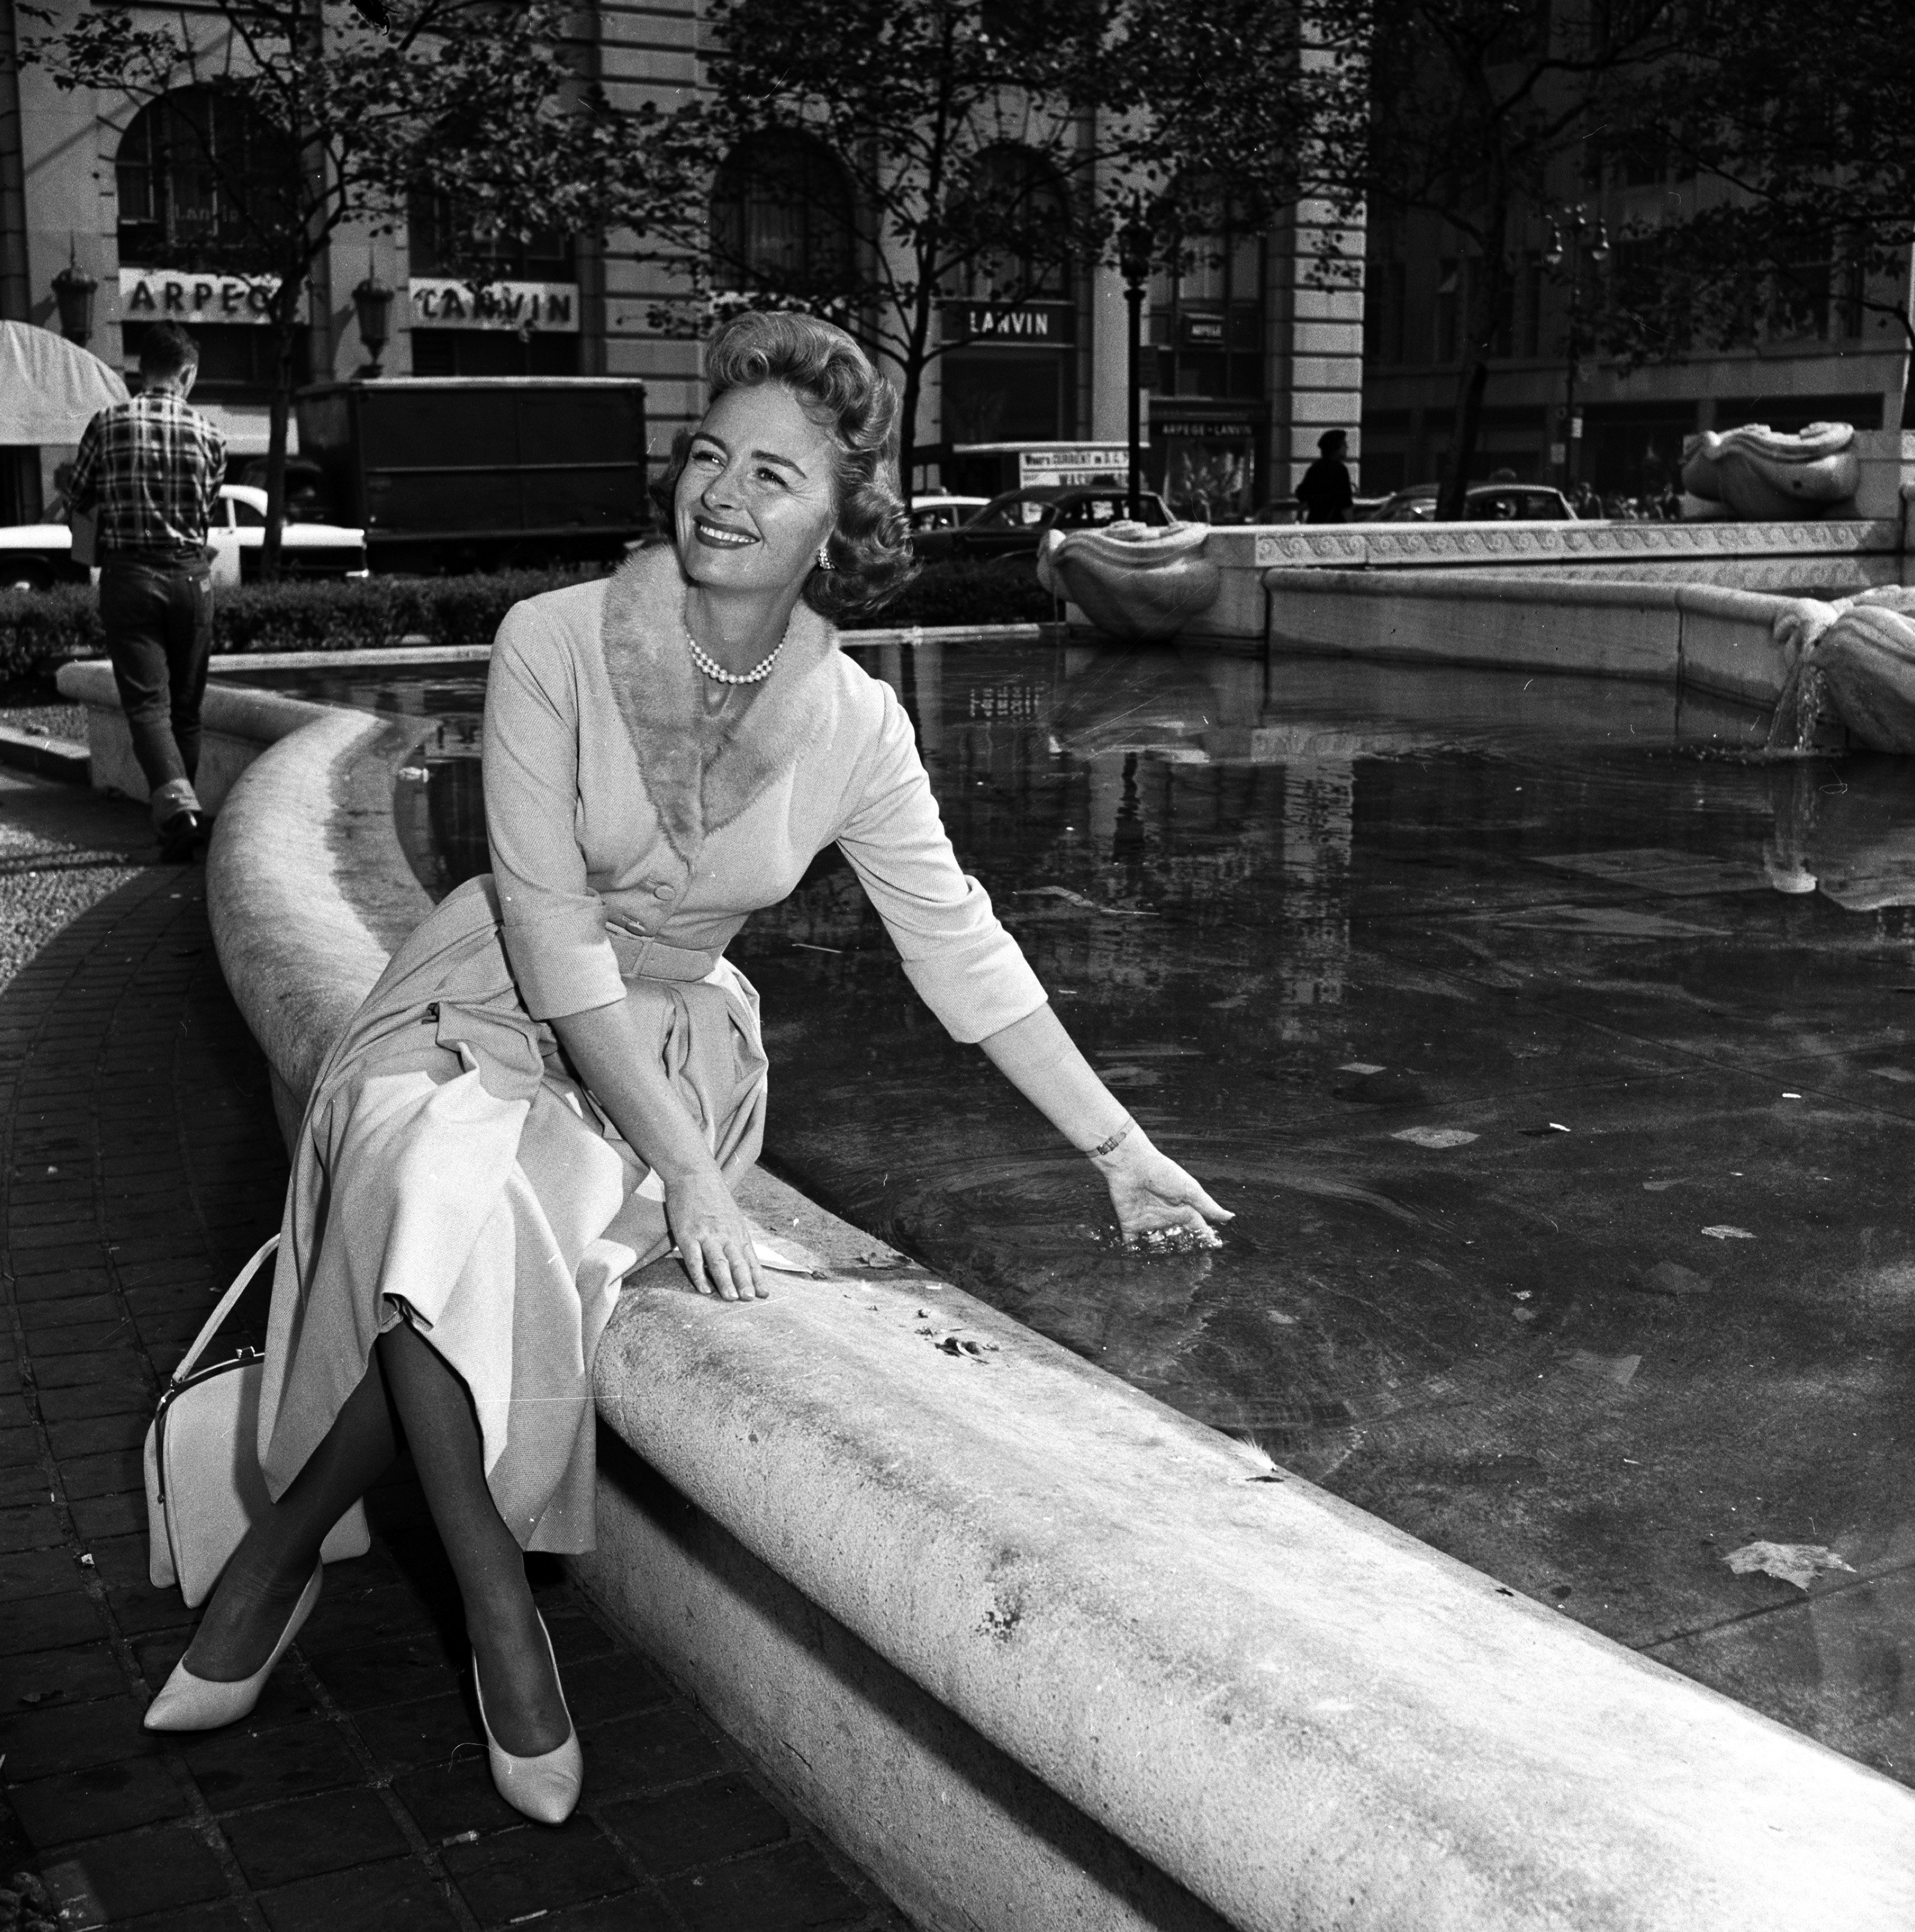 Actress Donna Reed on the set of "The Donna Reed Show" on September 21, 1959. | Source: Getty Images